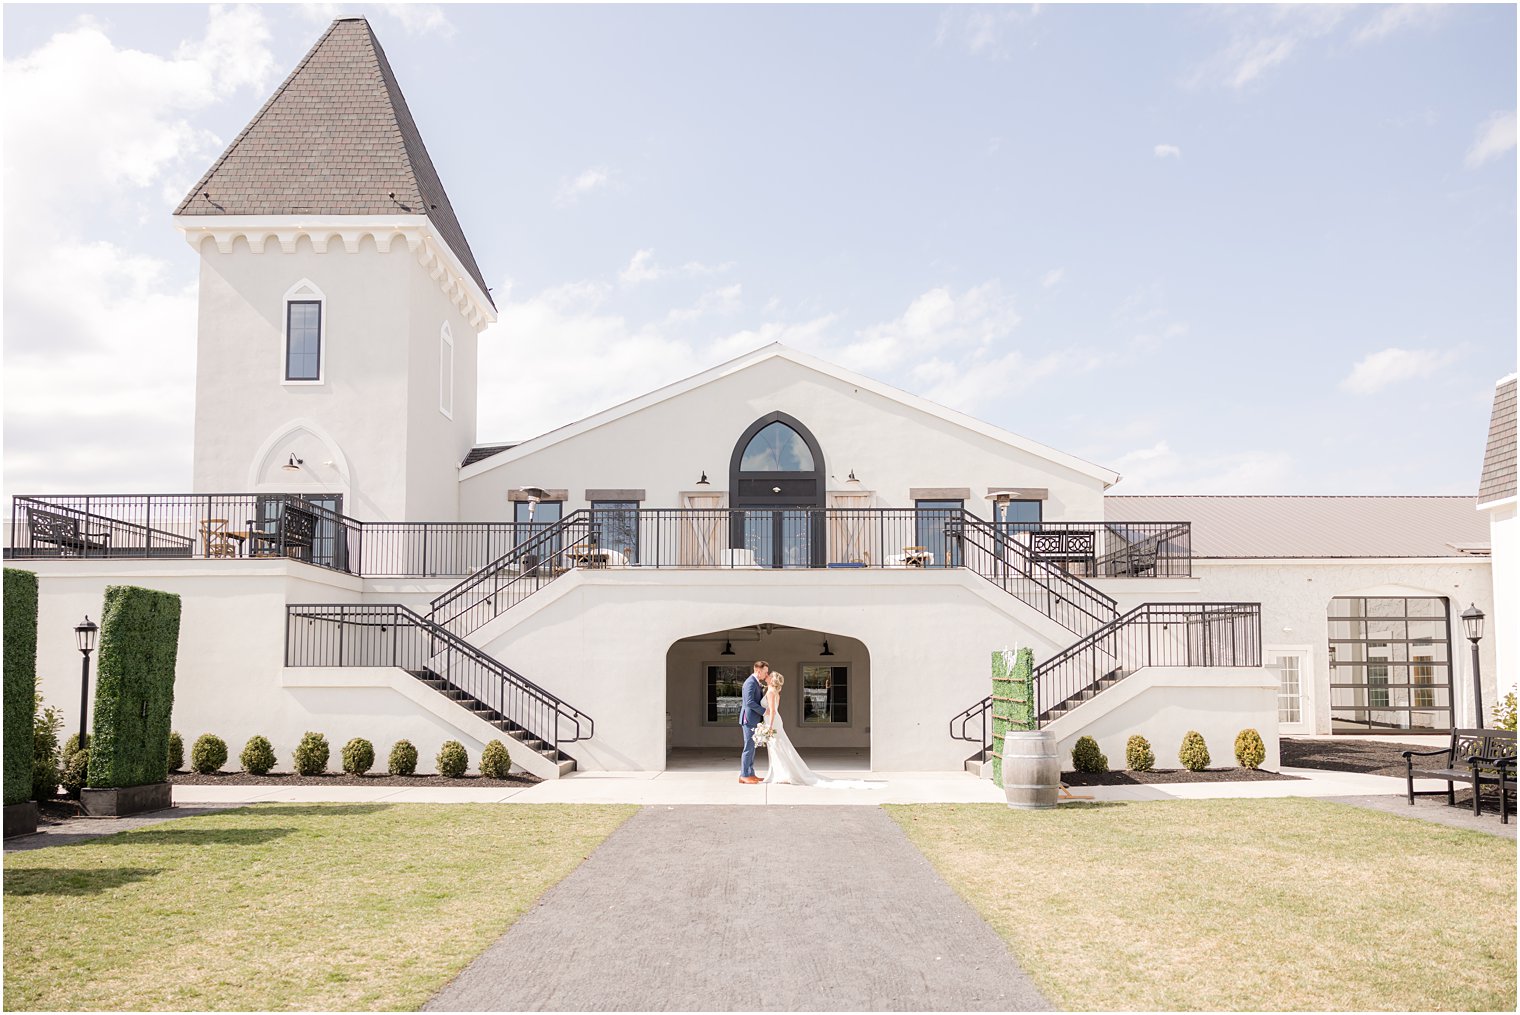 bride and groom in front of Vineyard Ballroom at Renault Winery in Egg Harbor Township, NJ